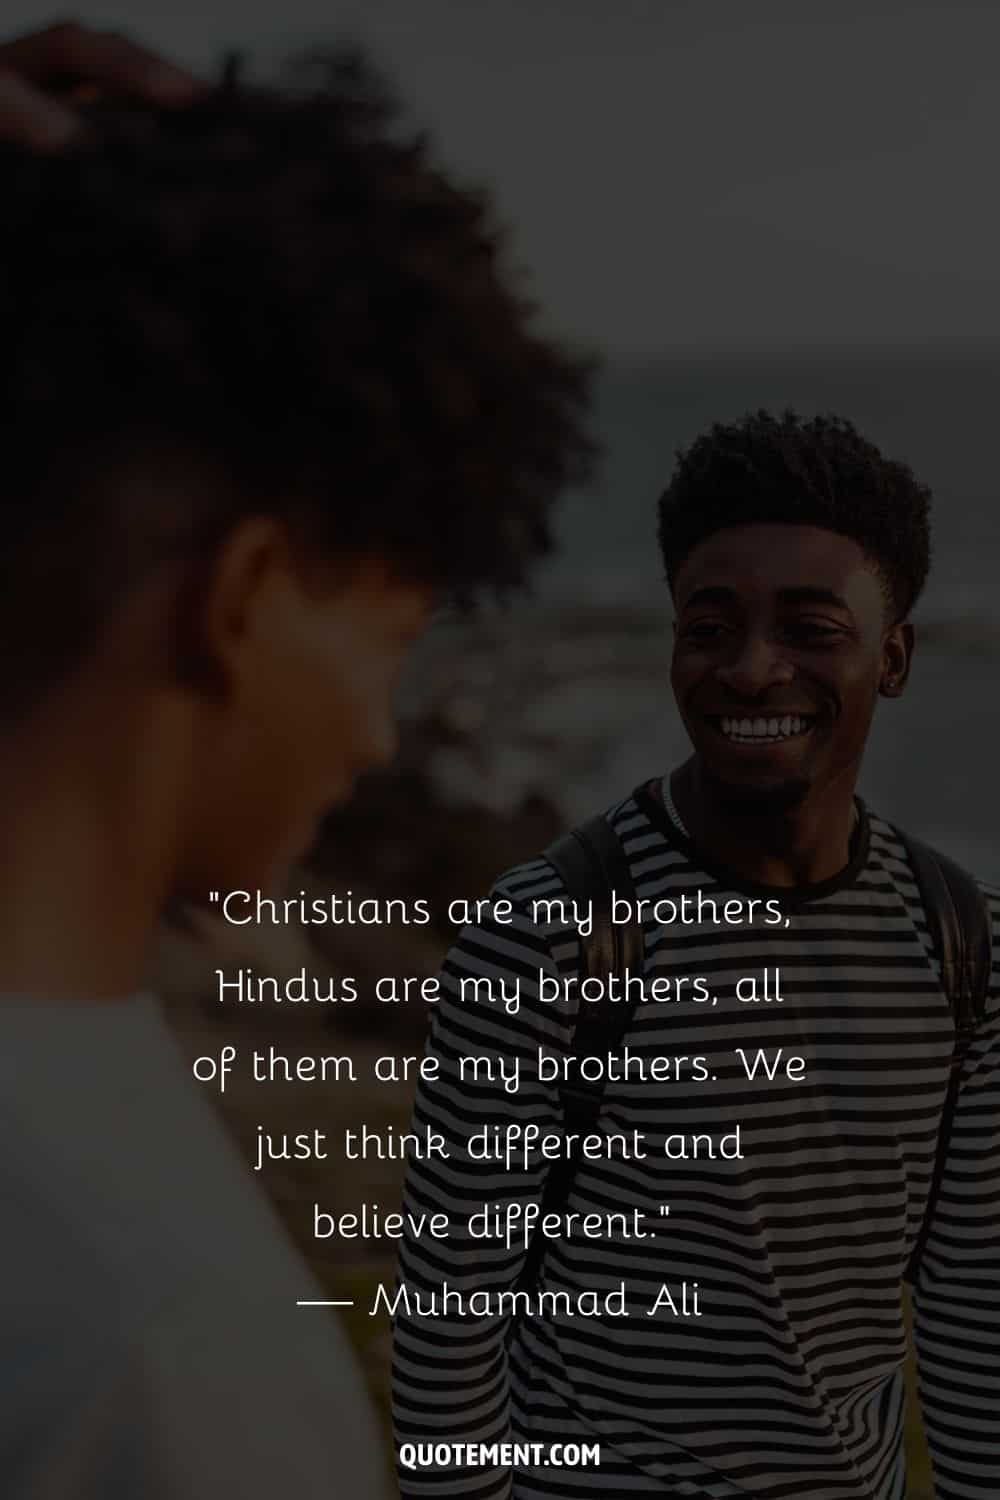 “Christians are my brothers, Hindus are my brothers, all of them are my brothers. We just think different and believe different.” — Muhammad Ali